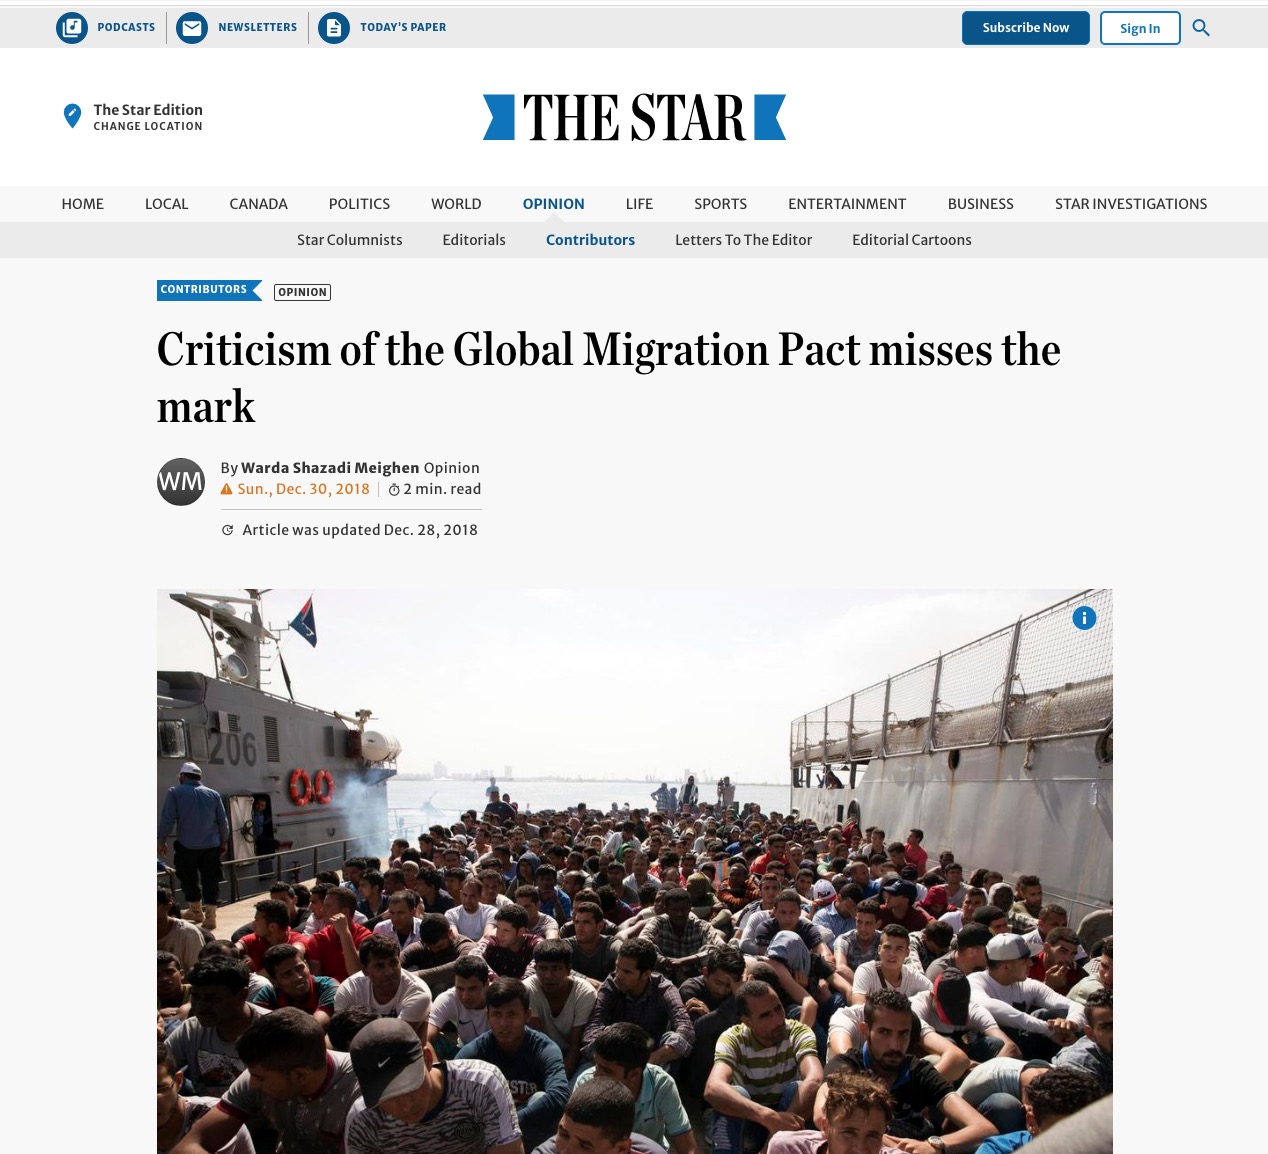 Warda Shazadi Meighen – Criticism of the Global Migration Pact misses the mark